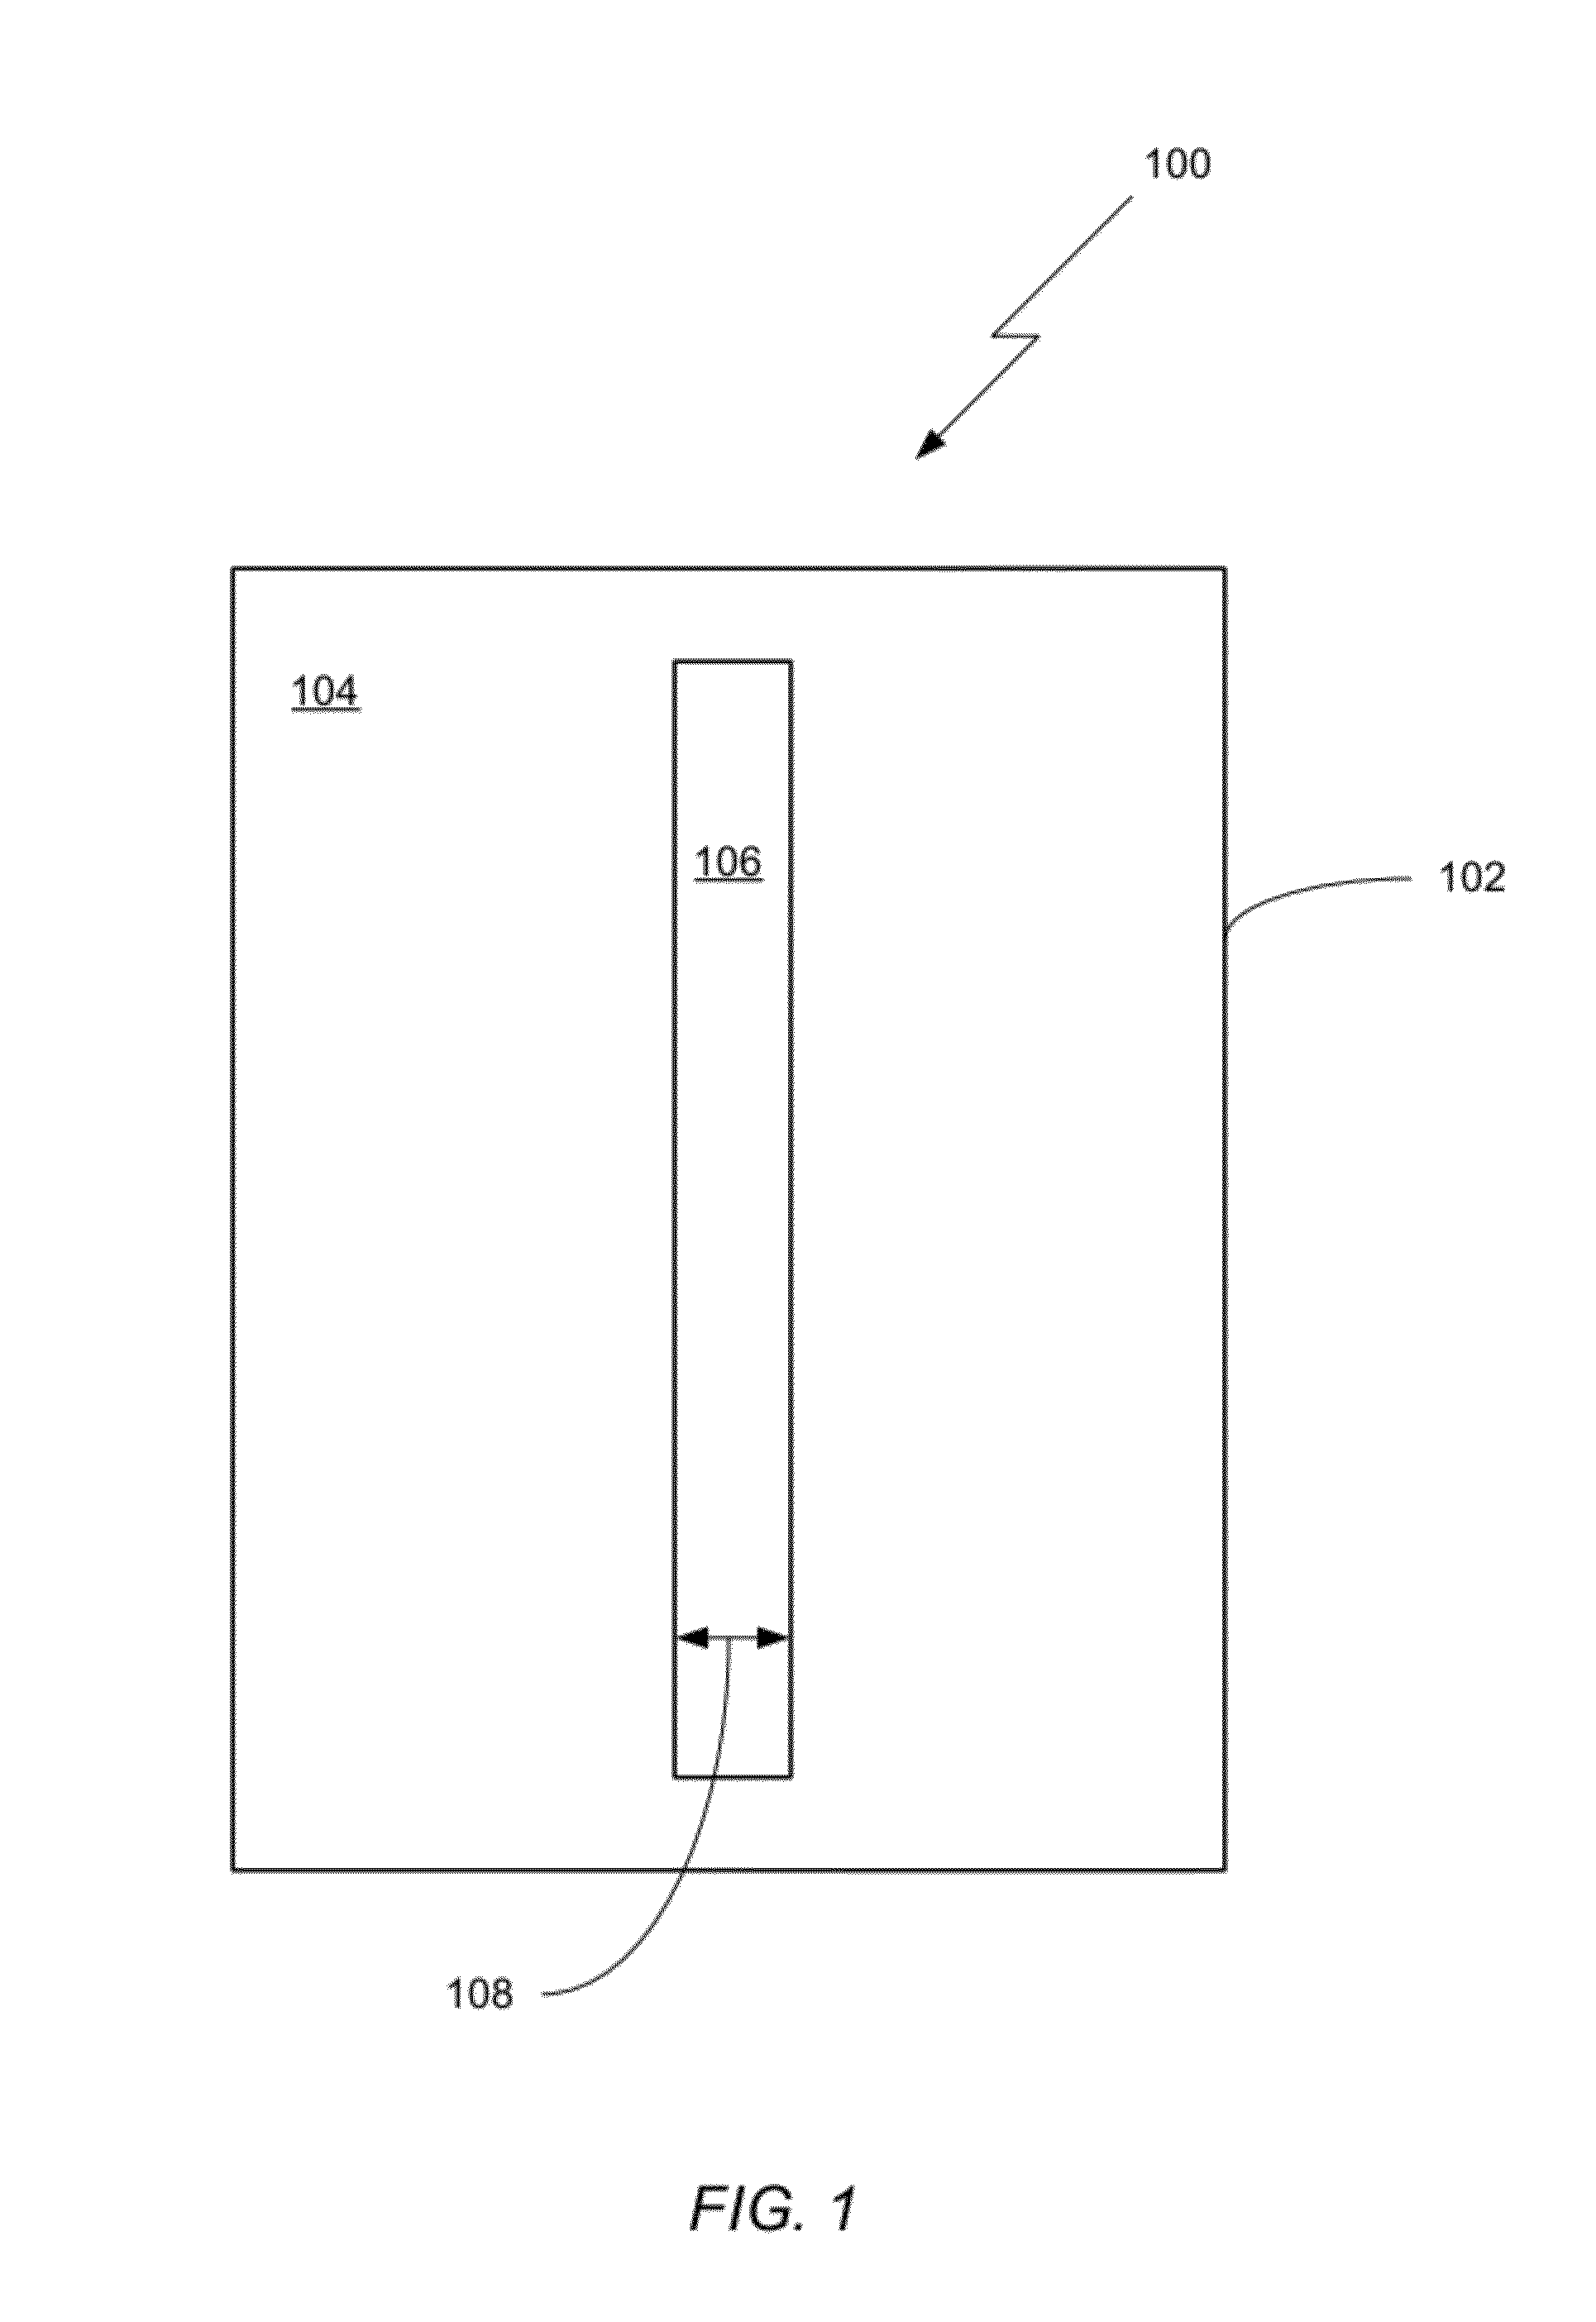 Slotted waveguide for loudspeakers